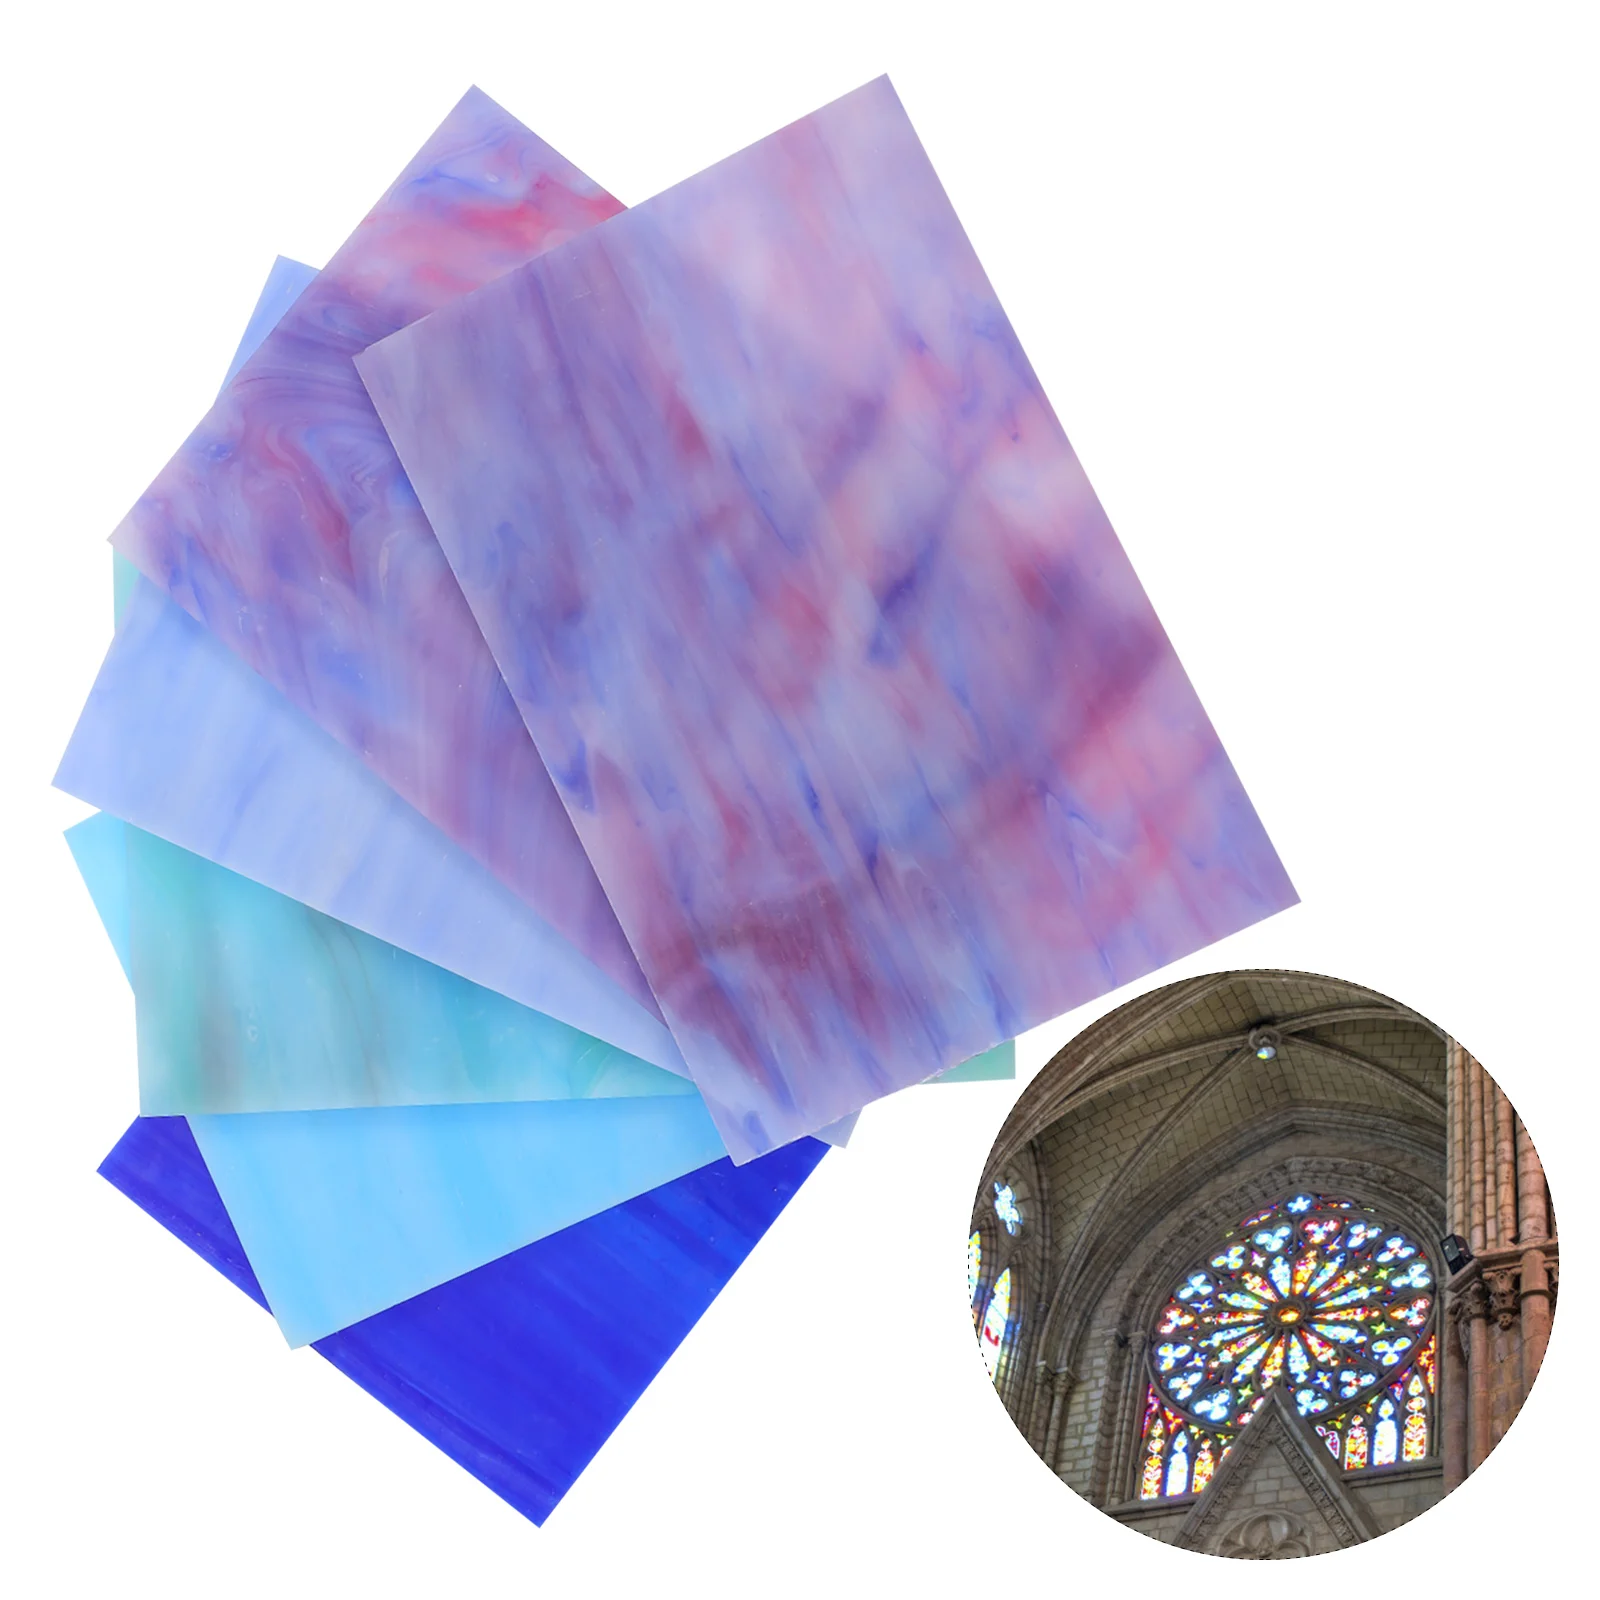 

6 Pcs Colored Mica Flakes Church Mosaic Glass Candlesticks Cathedral Tile Ceramic Stained